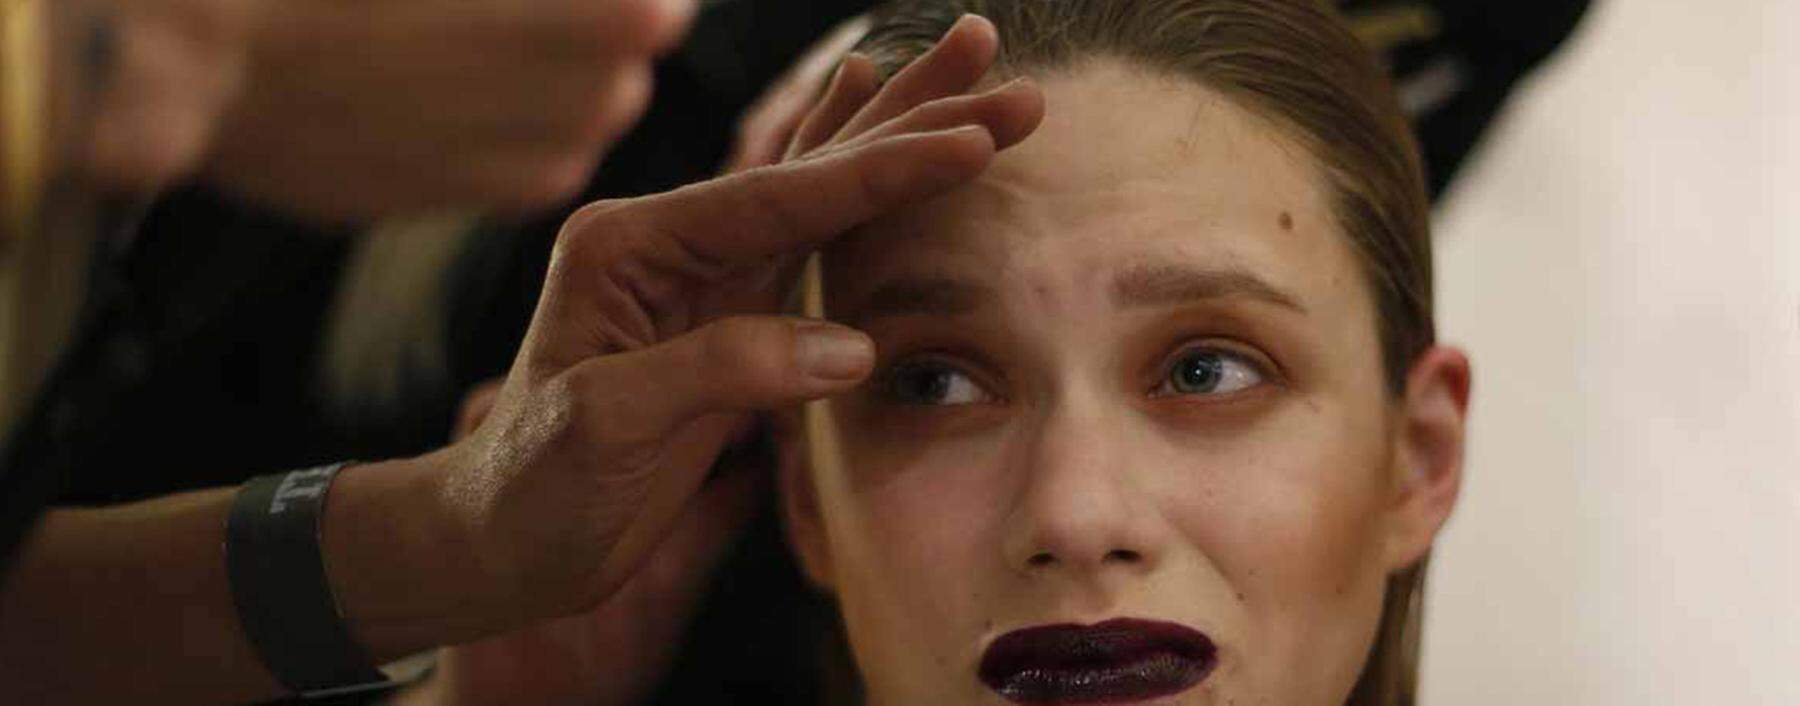 A model undergoes preparations backstage before presentation of Portuguese designer Dino Alves Fall-Winter 2013/2014 collection during Lisbon Fashion Week